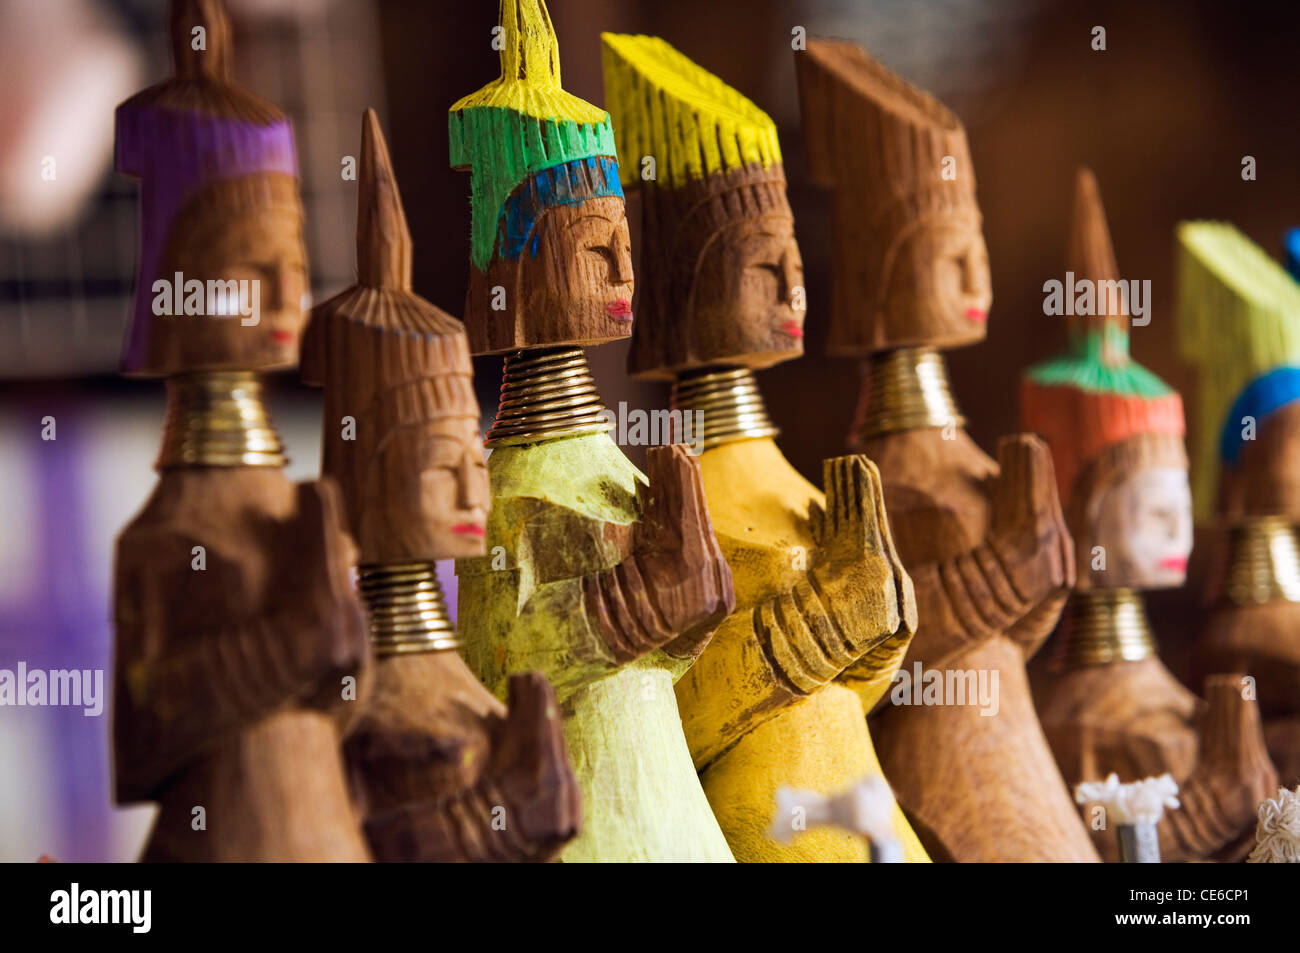 Souvenirs for sale at the 'Long Necked' Paudang village of Nai Soi, Mae Hong Son province, THAILAND Stock Photo